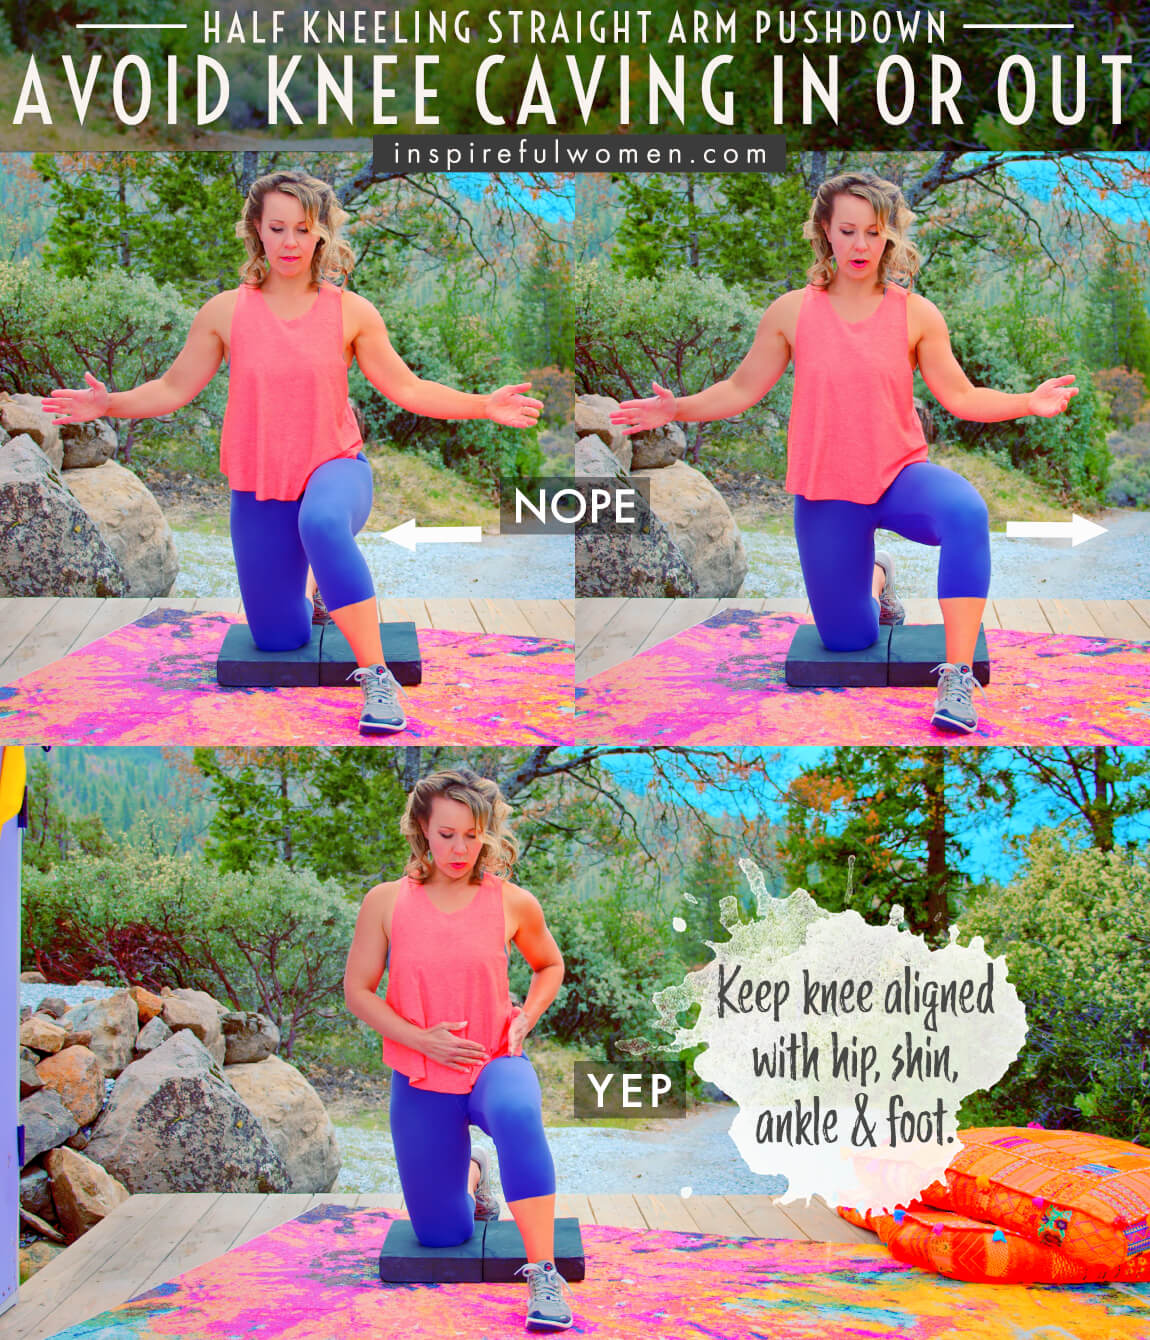 avoid-knee-caving-in-or-out-half-kneeling-lat-pushdown-back-workout-proper-form